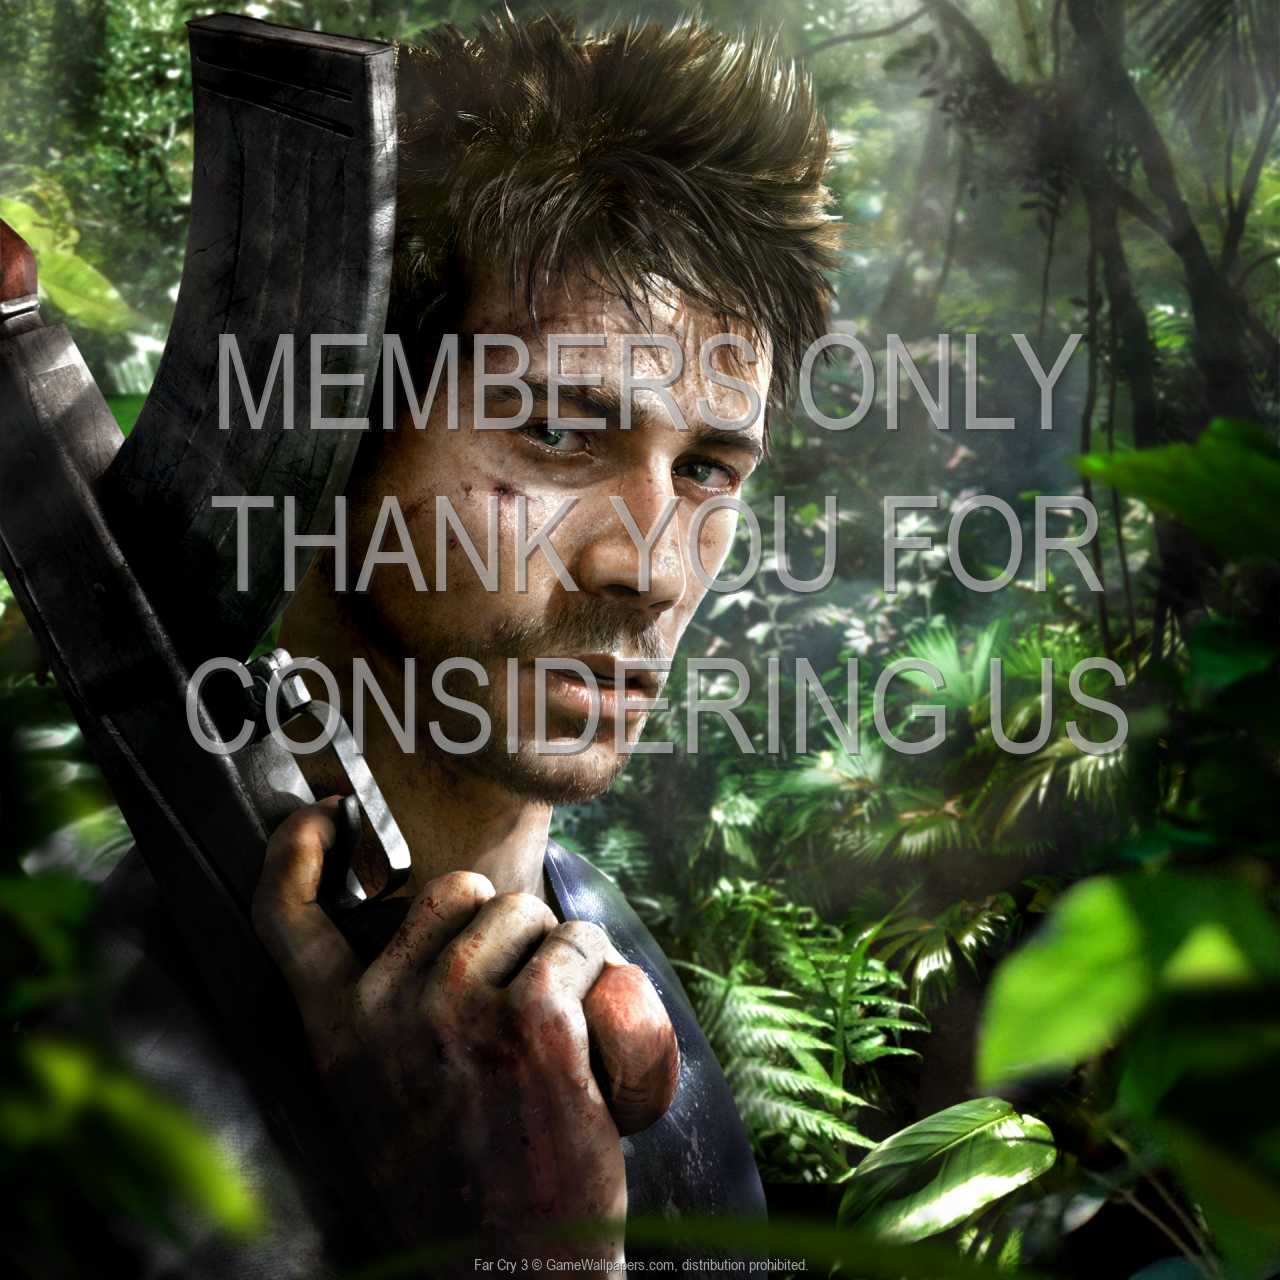 Far Cry 3 720p Horizontal Mobile wallpaper or background 08